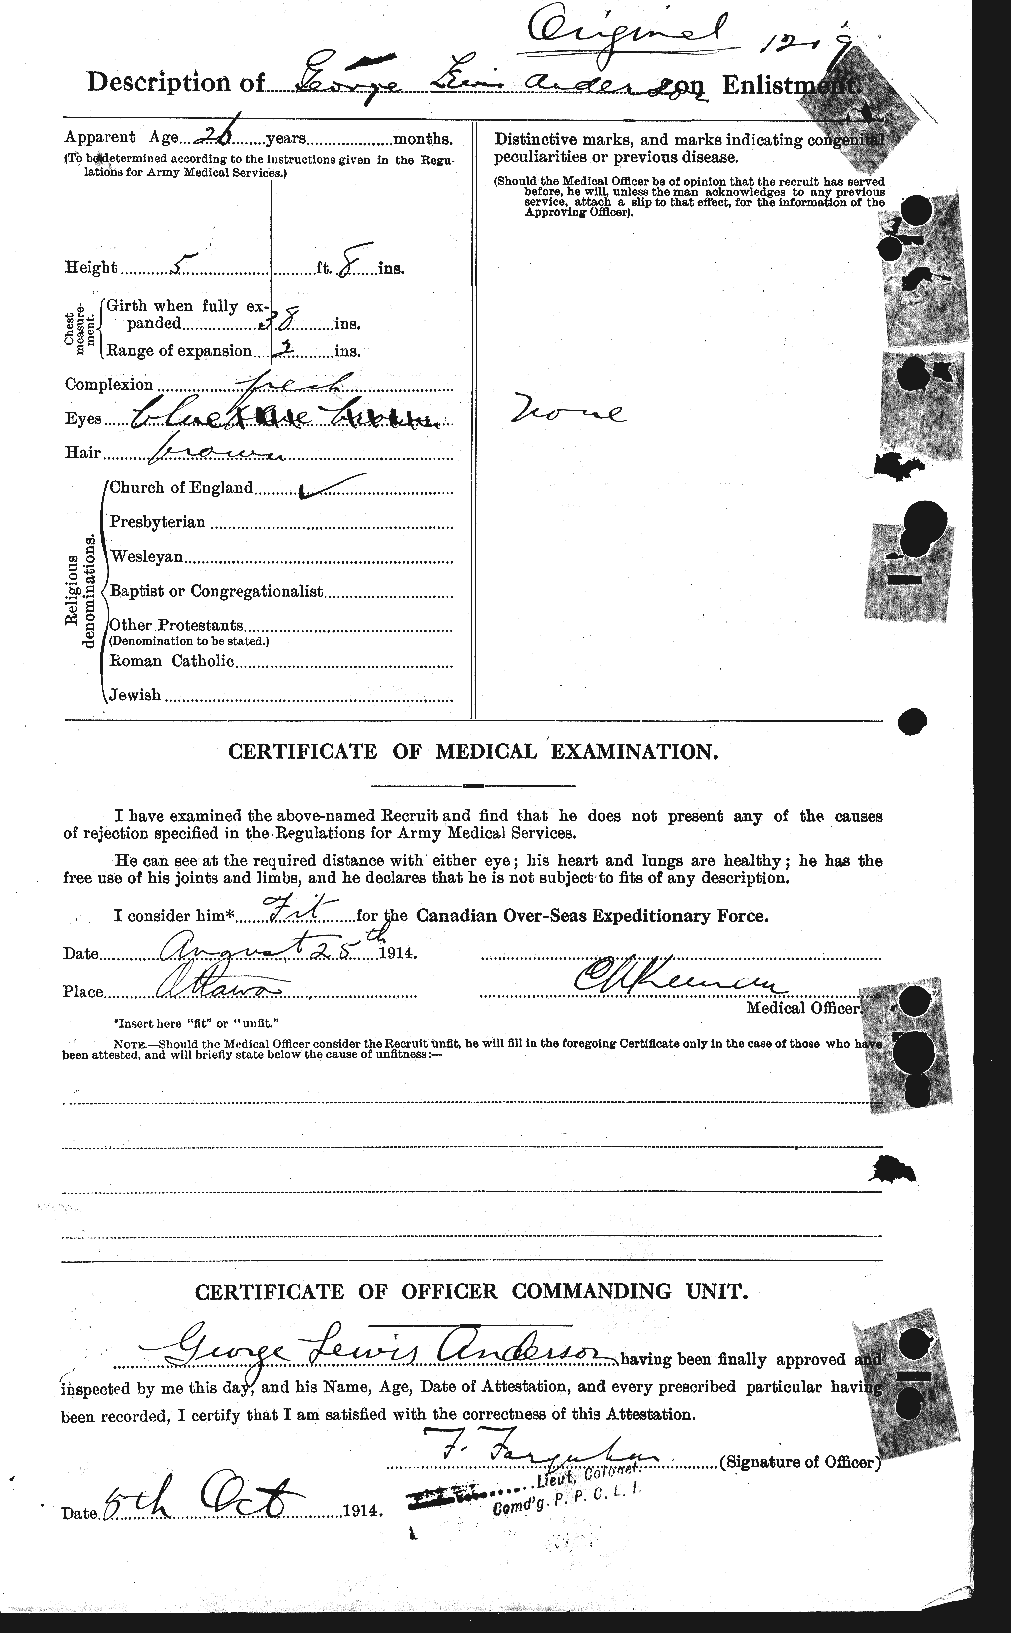 Personnel Records of the First World War - CEF 209713b